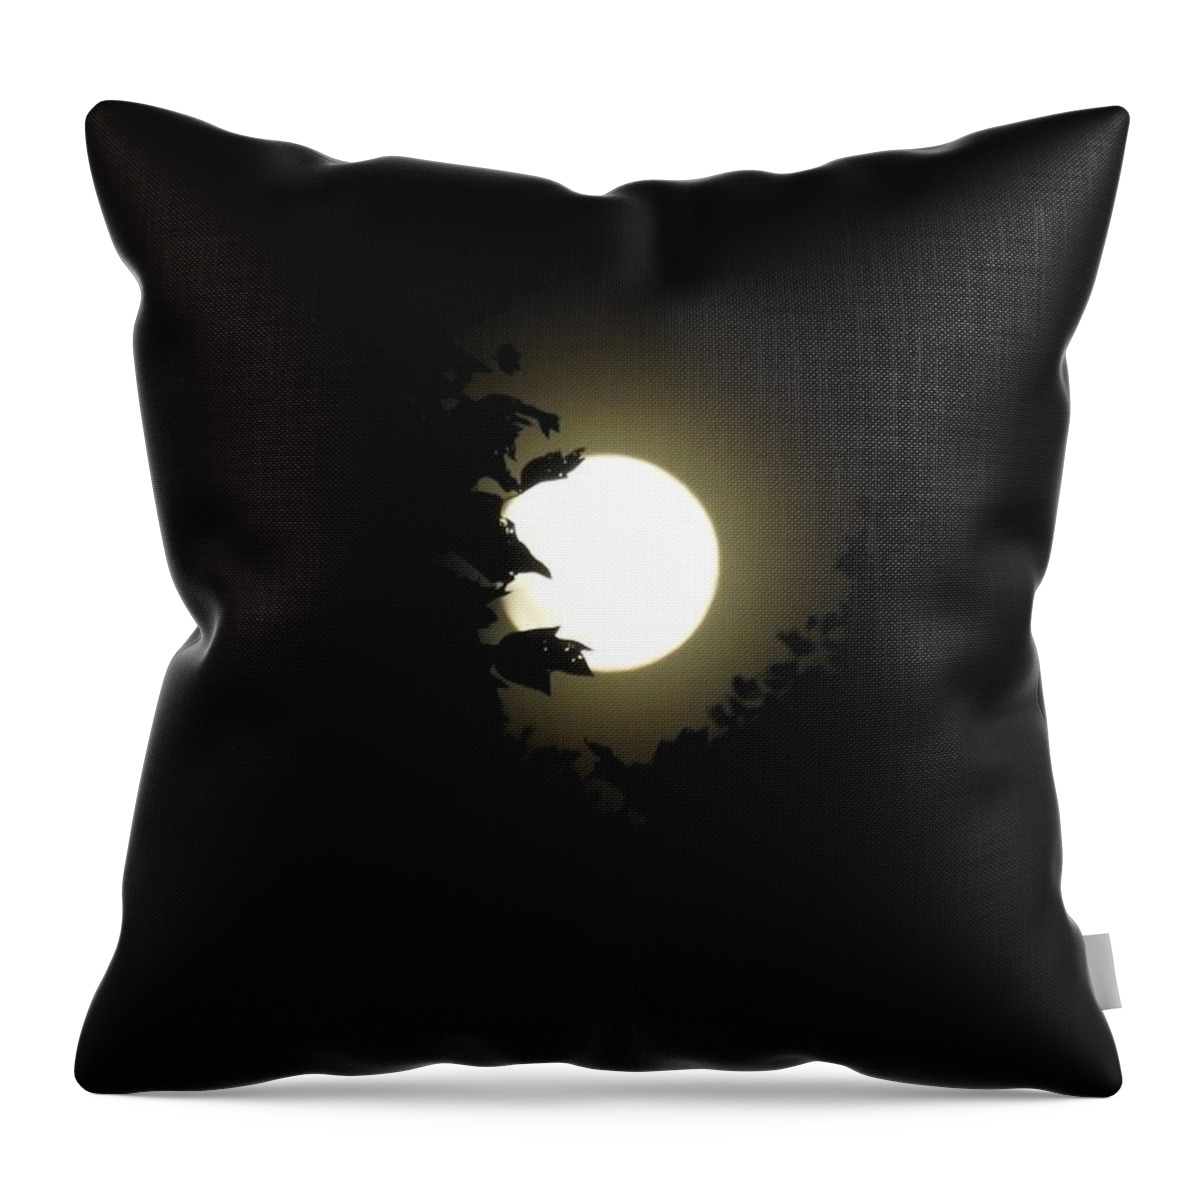 Holding The Moon Throw Pillow featuring the photograph Holding the Moon by Kathy Chism